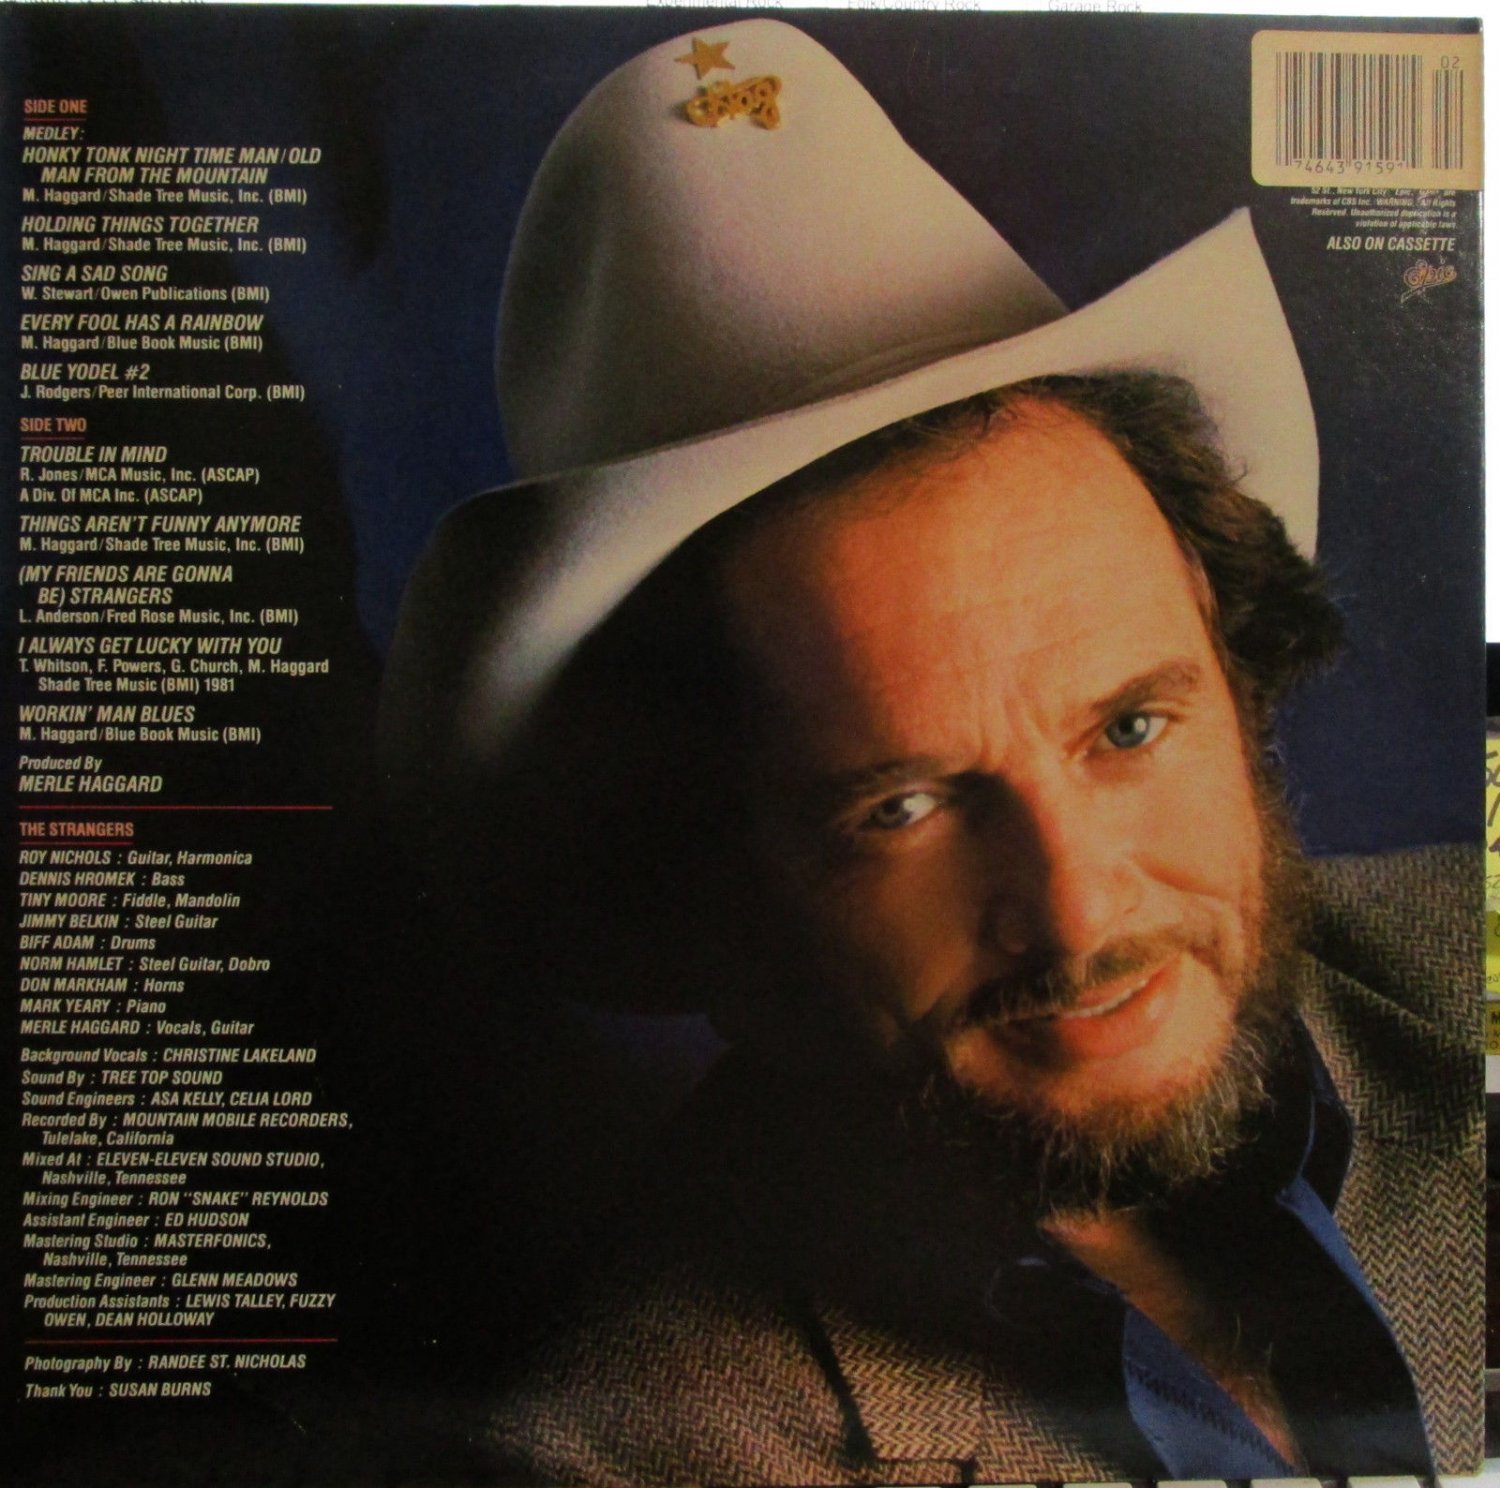 Merle Haggard - The Epic Collection (Recorded Live) (Epic 39159) ('83)